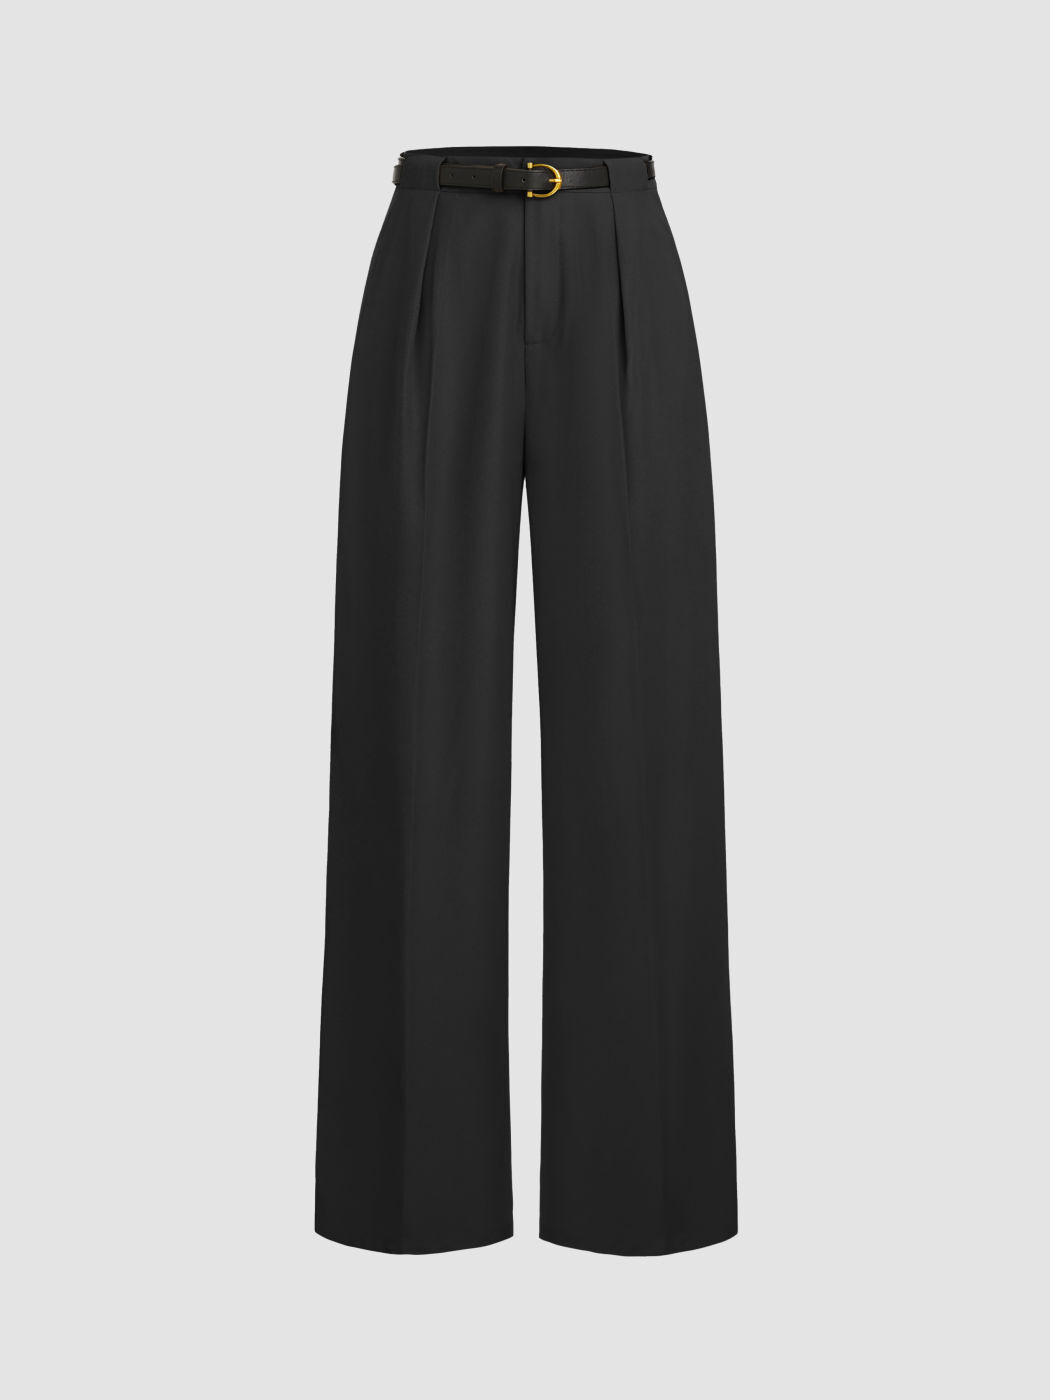 MID WAIST SOLID POCKET STRAIGHT LEG TROUSERS WITH BELT